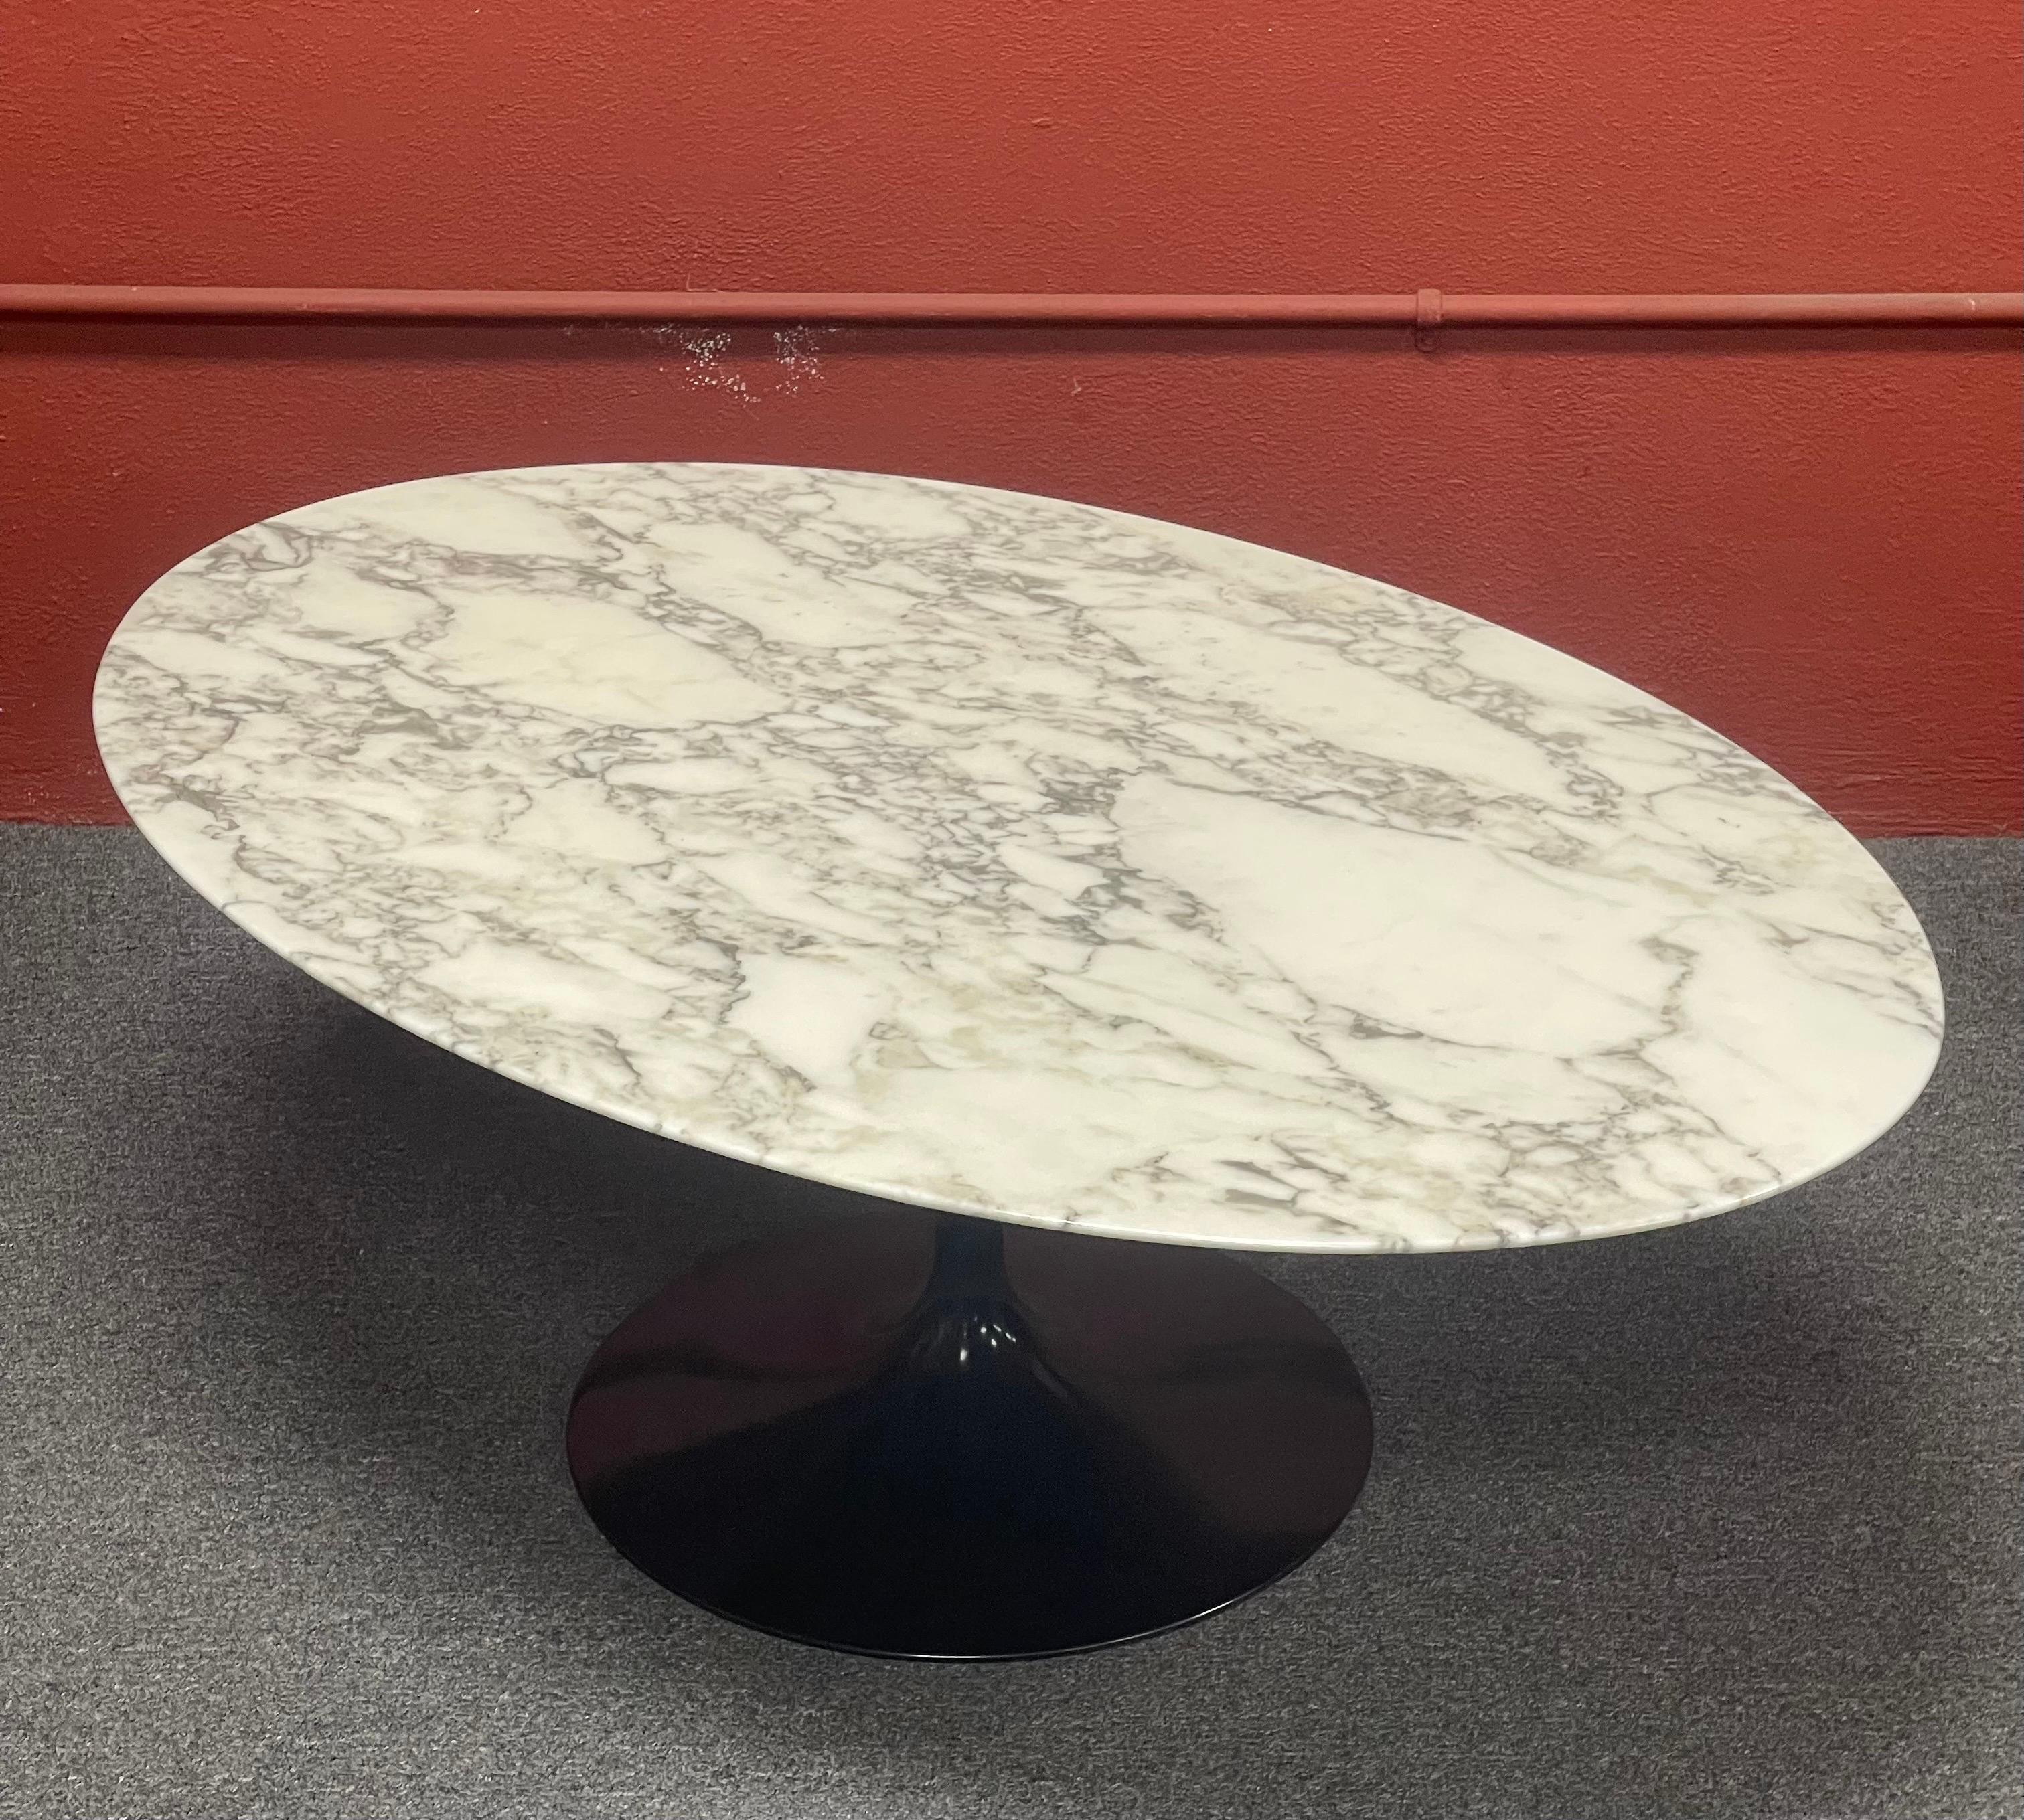 Authentic Polished Carrara Marble Top Coffee Table by Eero Saarinen for Knoll 5